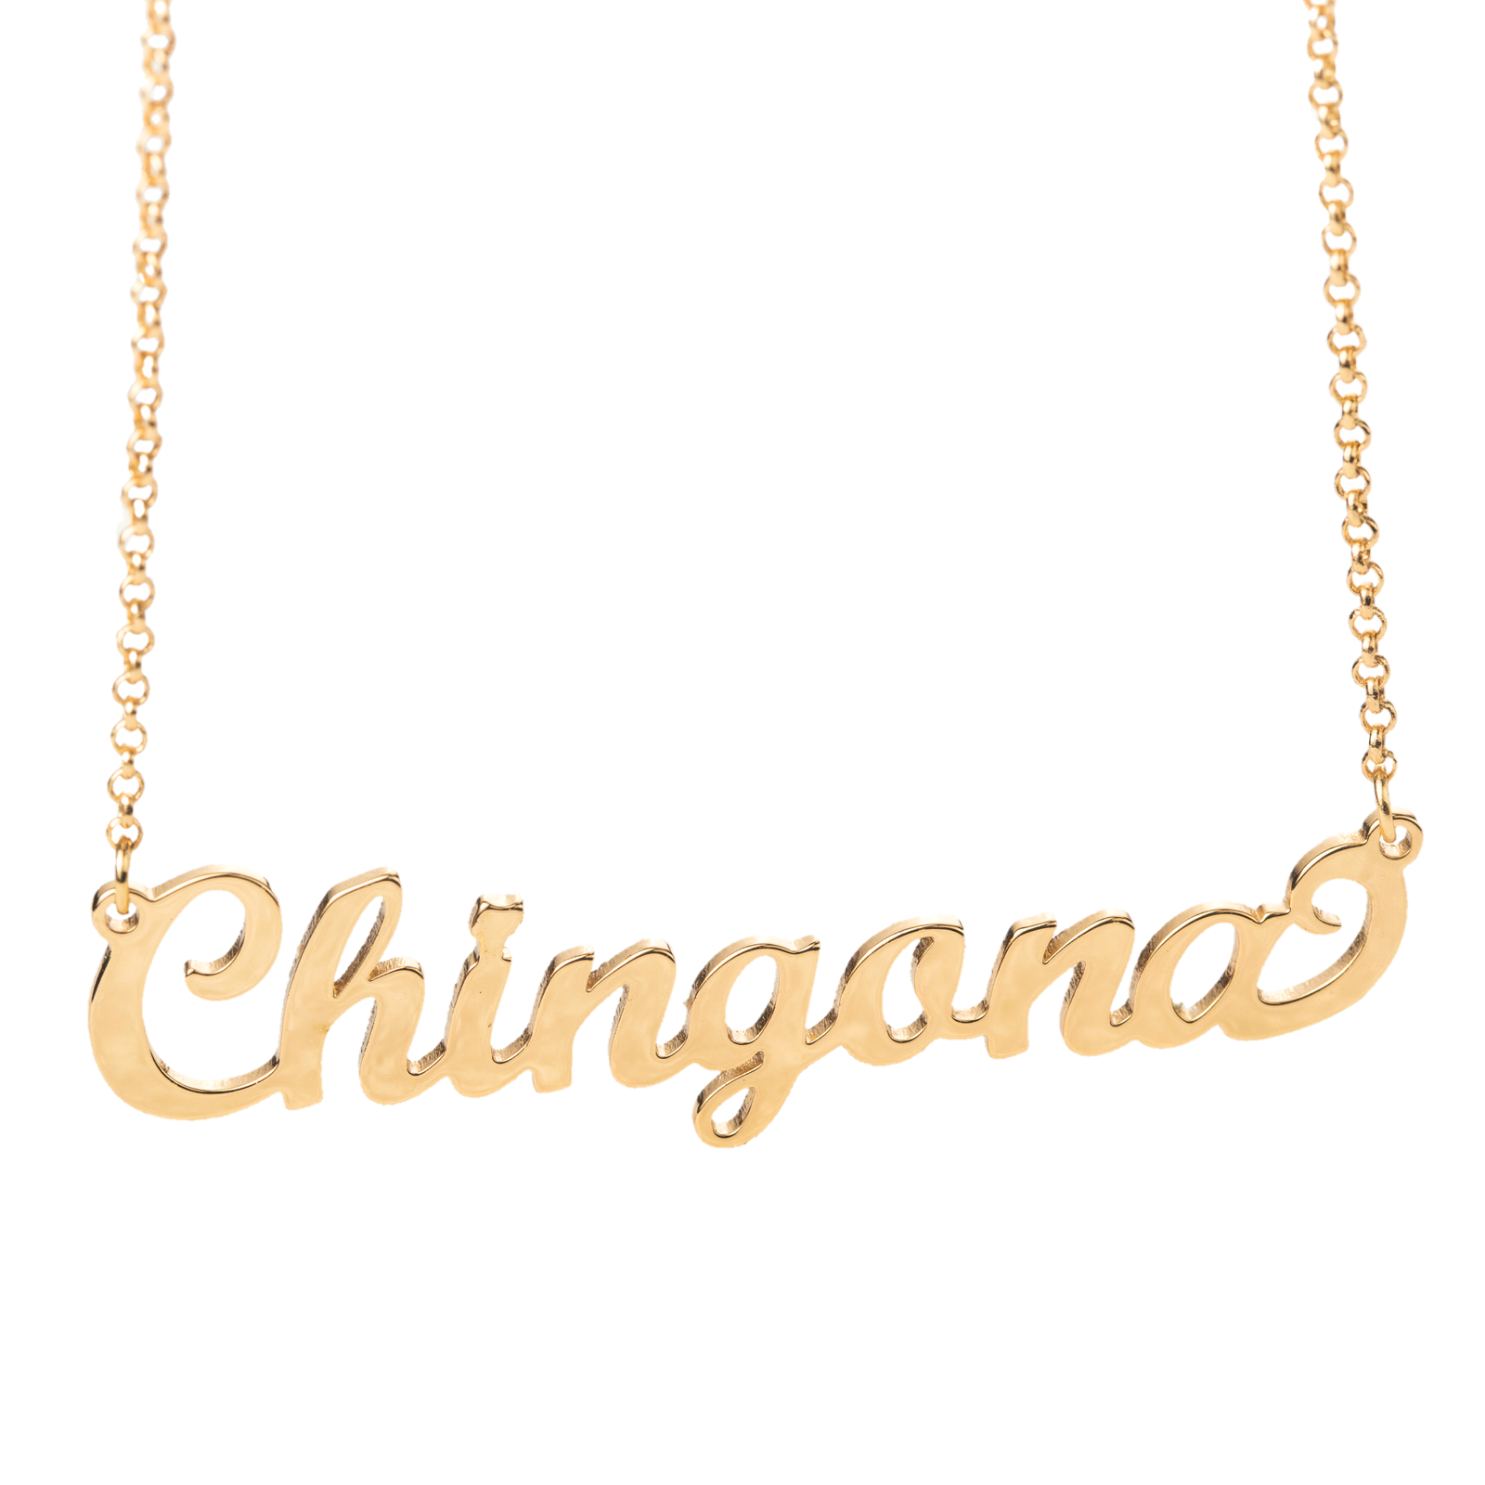 Gold-plated sterling silver women's necklace with the word 'Chingona' in cursive lettering